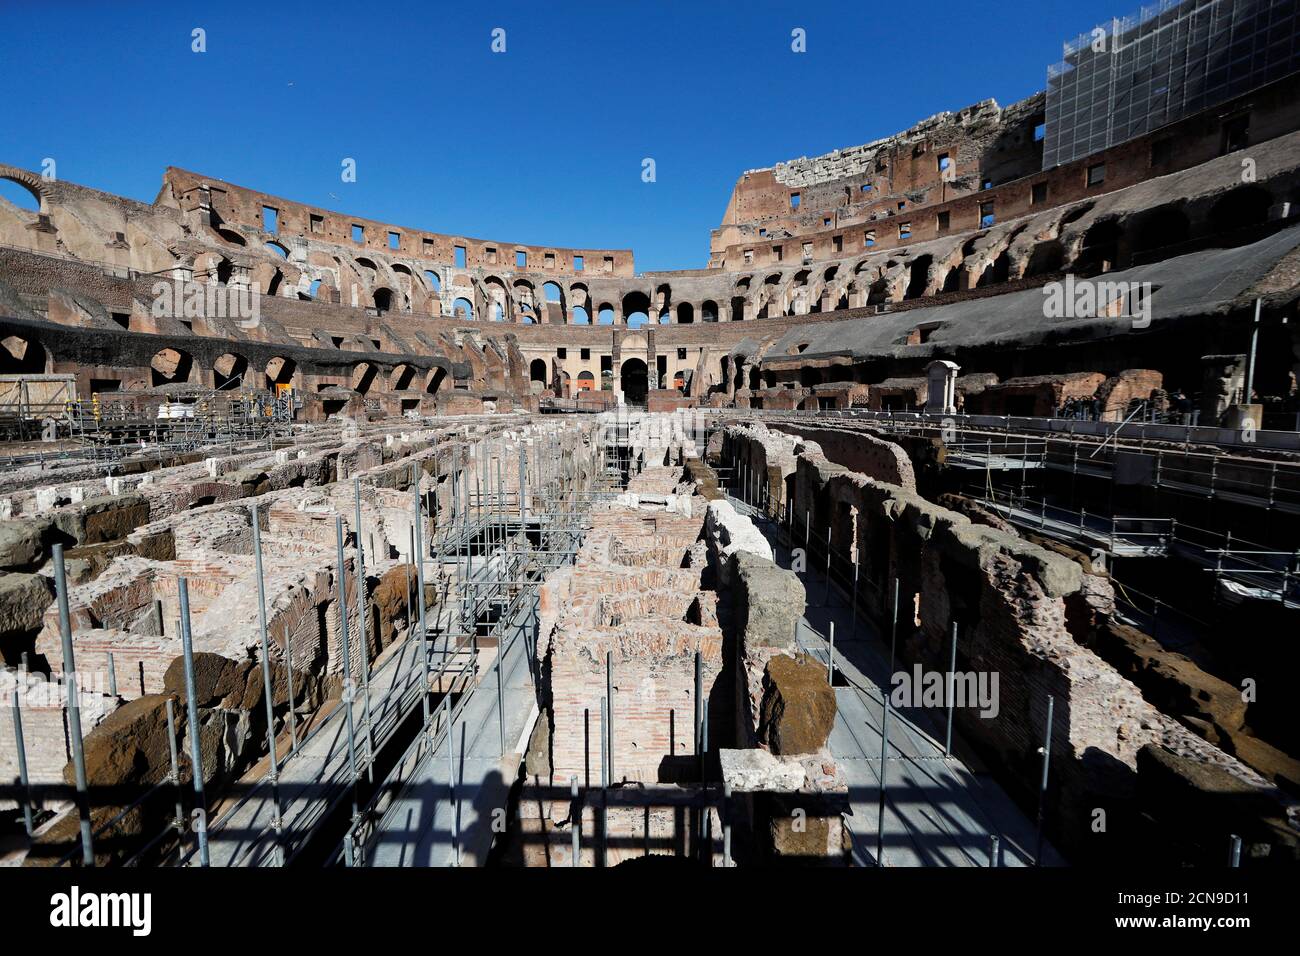 Rome's ancient Colosseum reopens with social distancing and hygiene measures in place after months of closure due the spread of the coronavirus disease (COVID-19), in Rome, Italy June 1, 2020. REUTERS/Yara Nardi Stock Photo